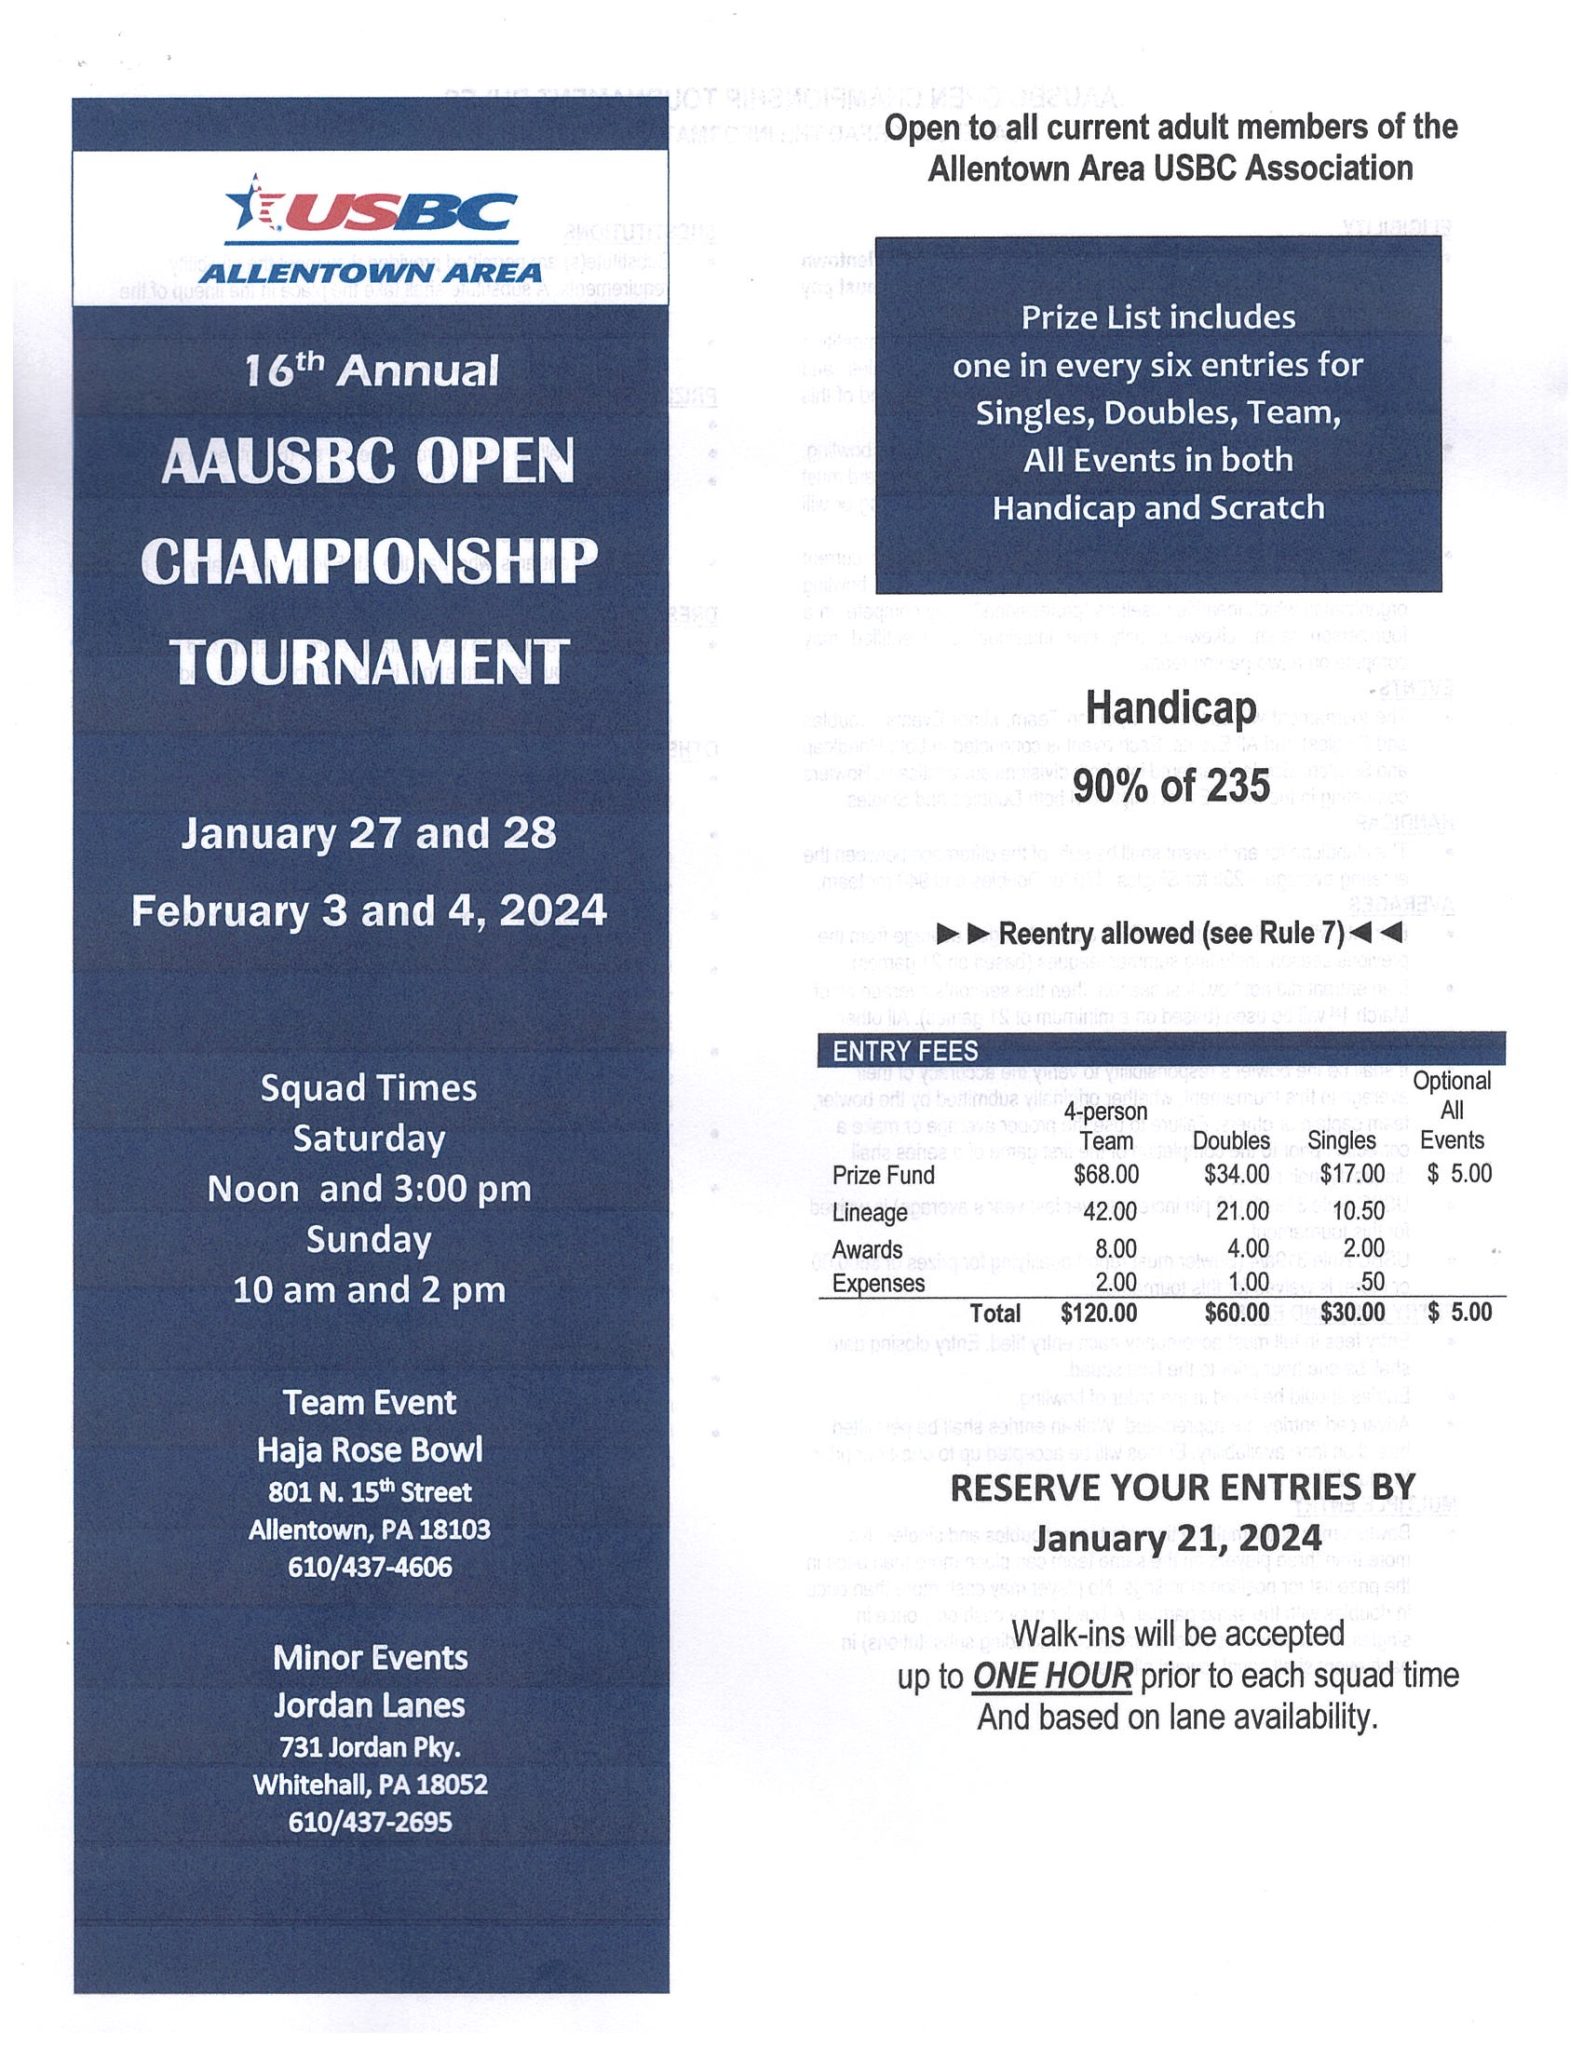 16th Annual AAUSBC Open Championship Tournament 4